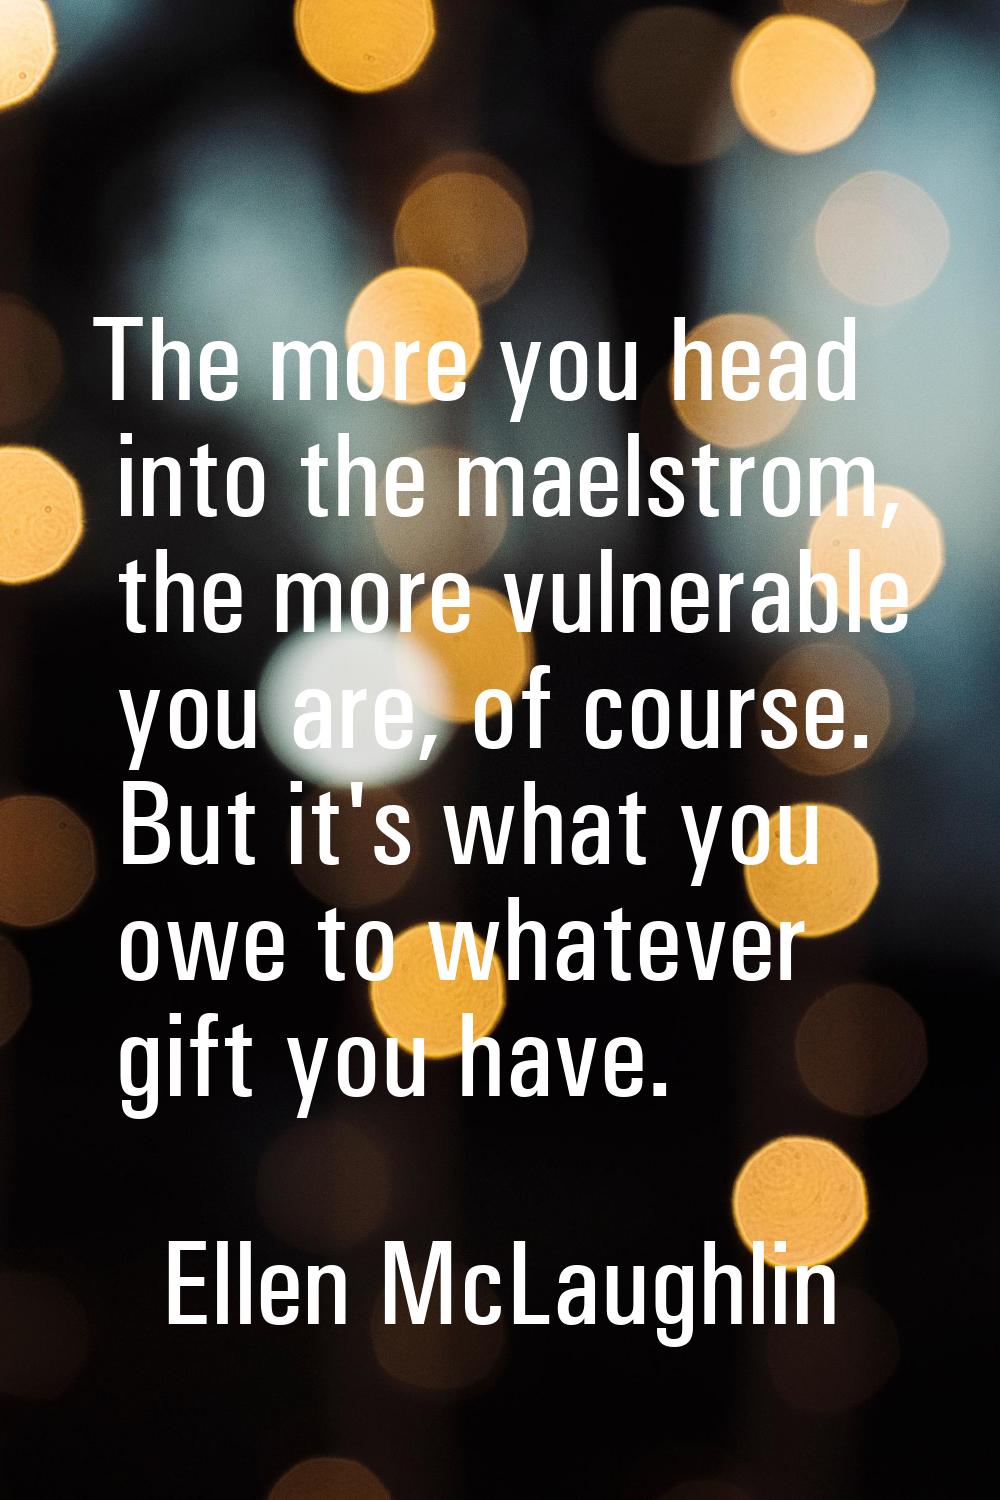 The more you head into the maelstrom, the more vulnerable you are, of course. But it's what you owe